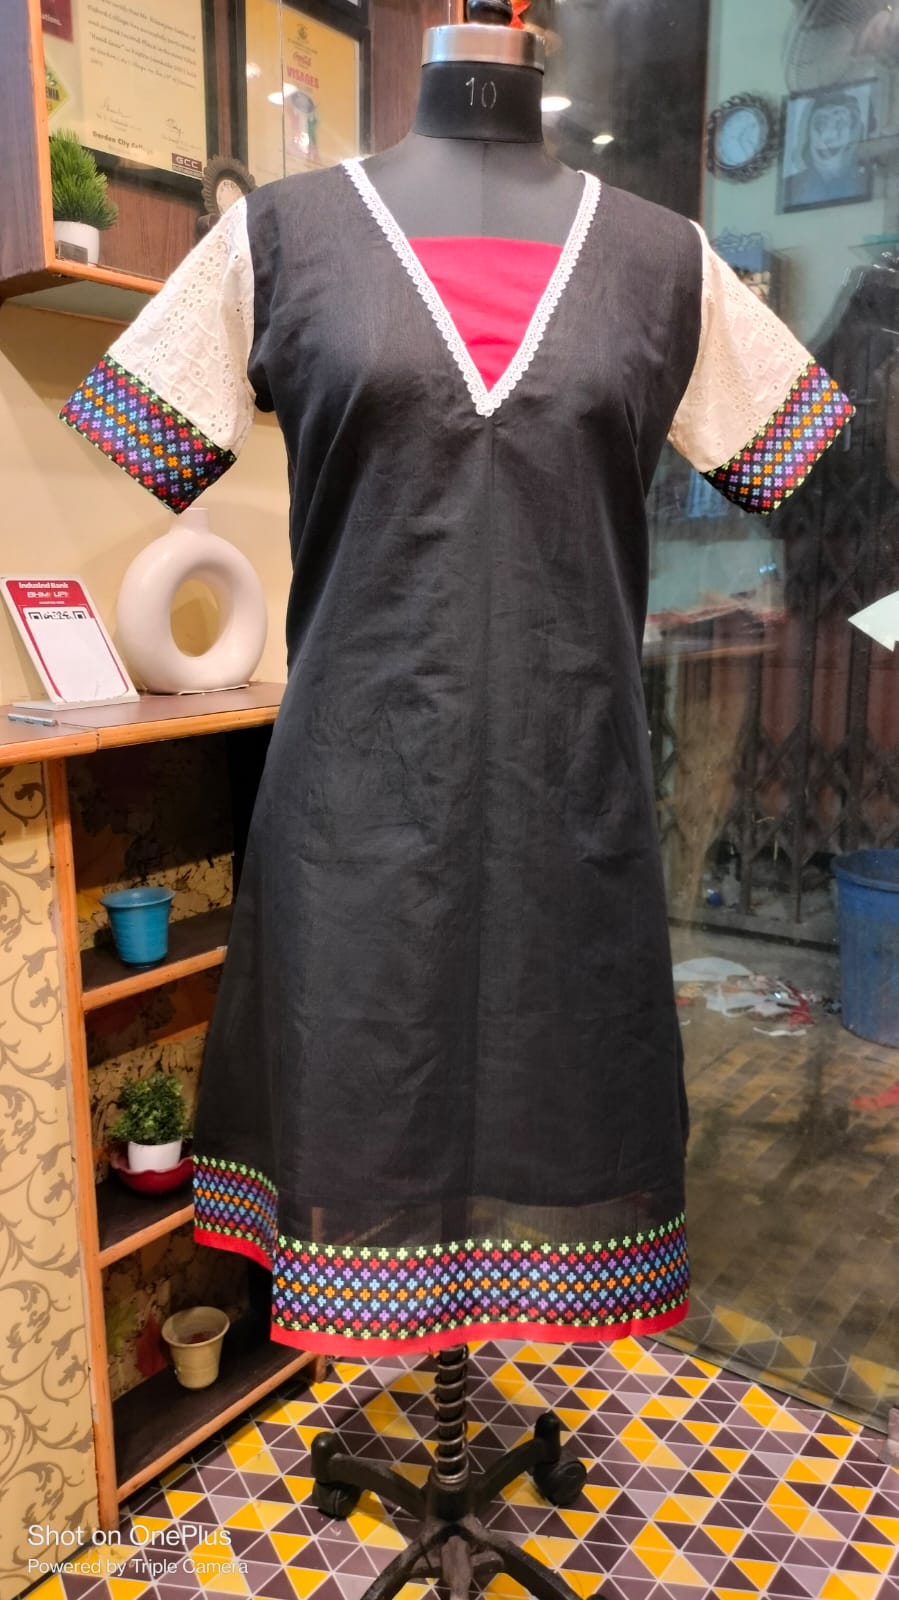 One piece Handloom khes with multi jacquard border design